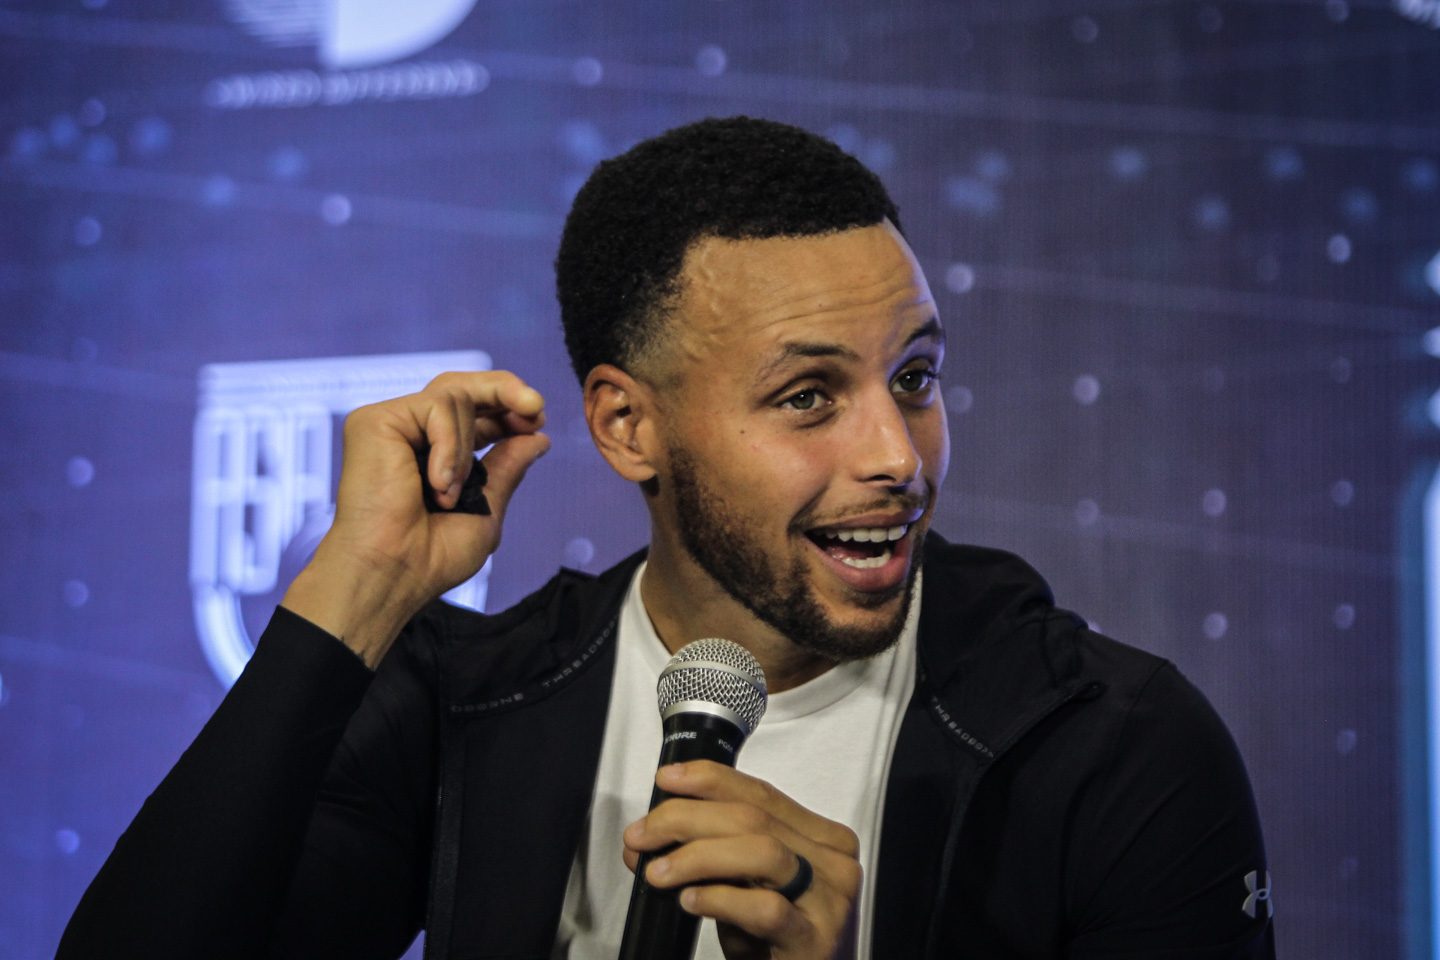 What is Steph Curry’s proudest NBA moment?